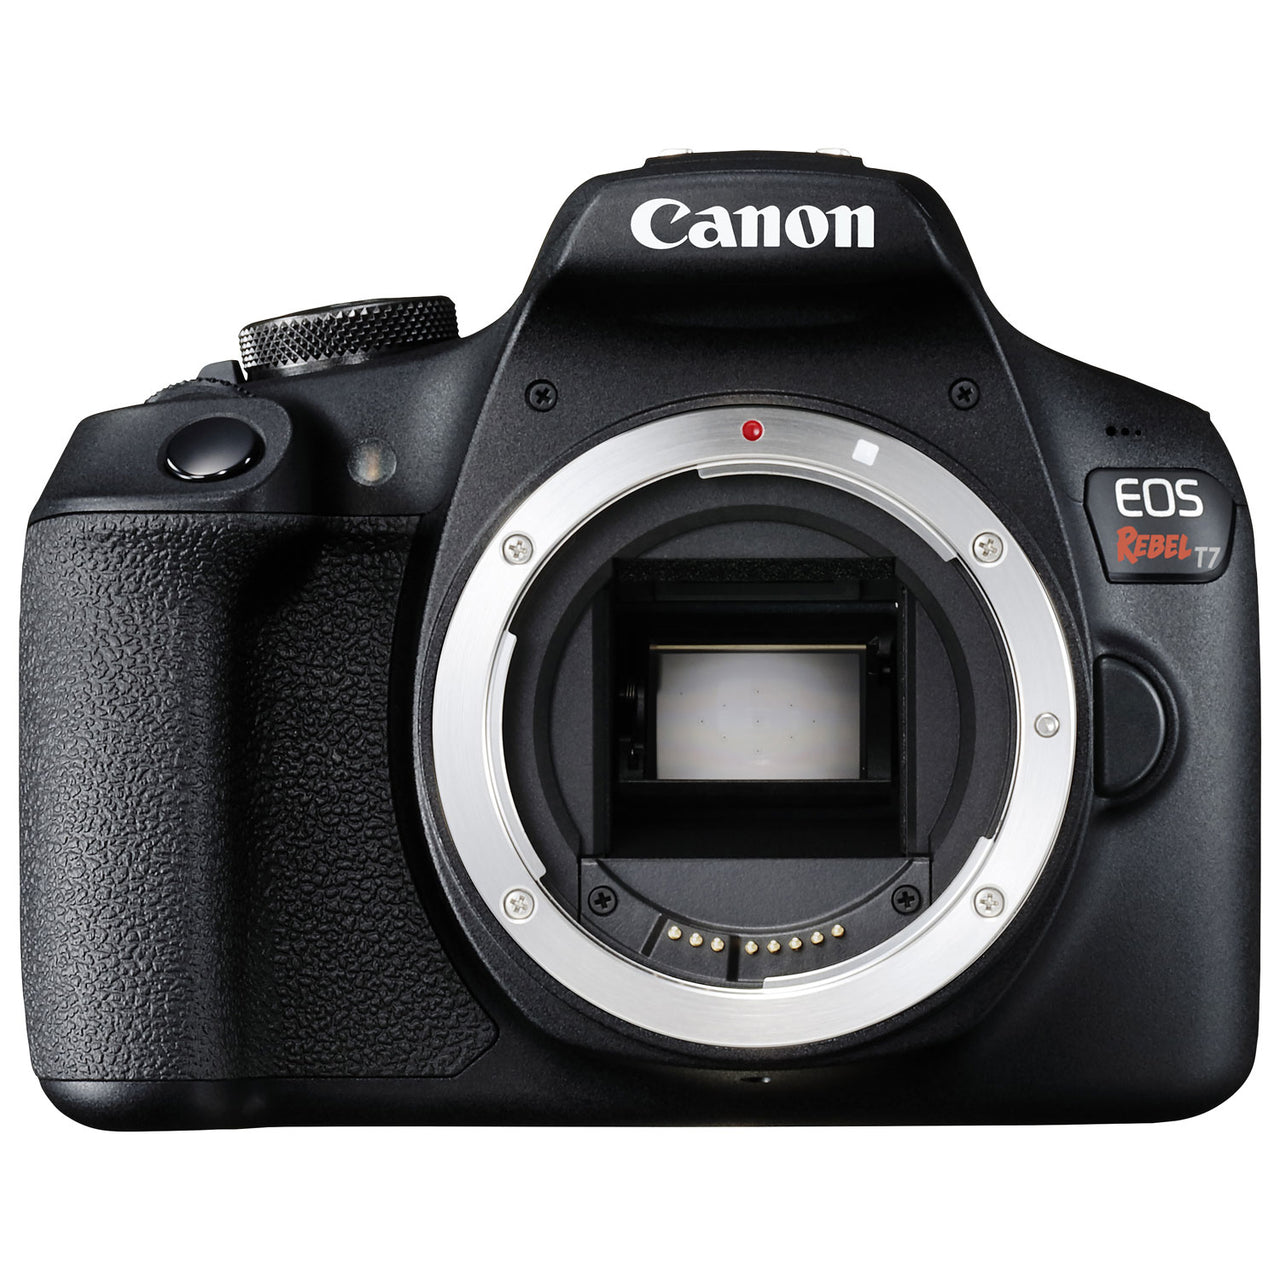 Canon EOS Rebel T7 DSLR Camera with 18-55mm Lens Kit